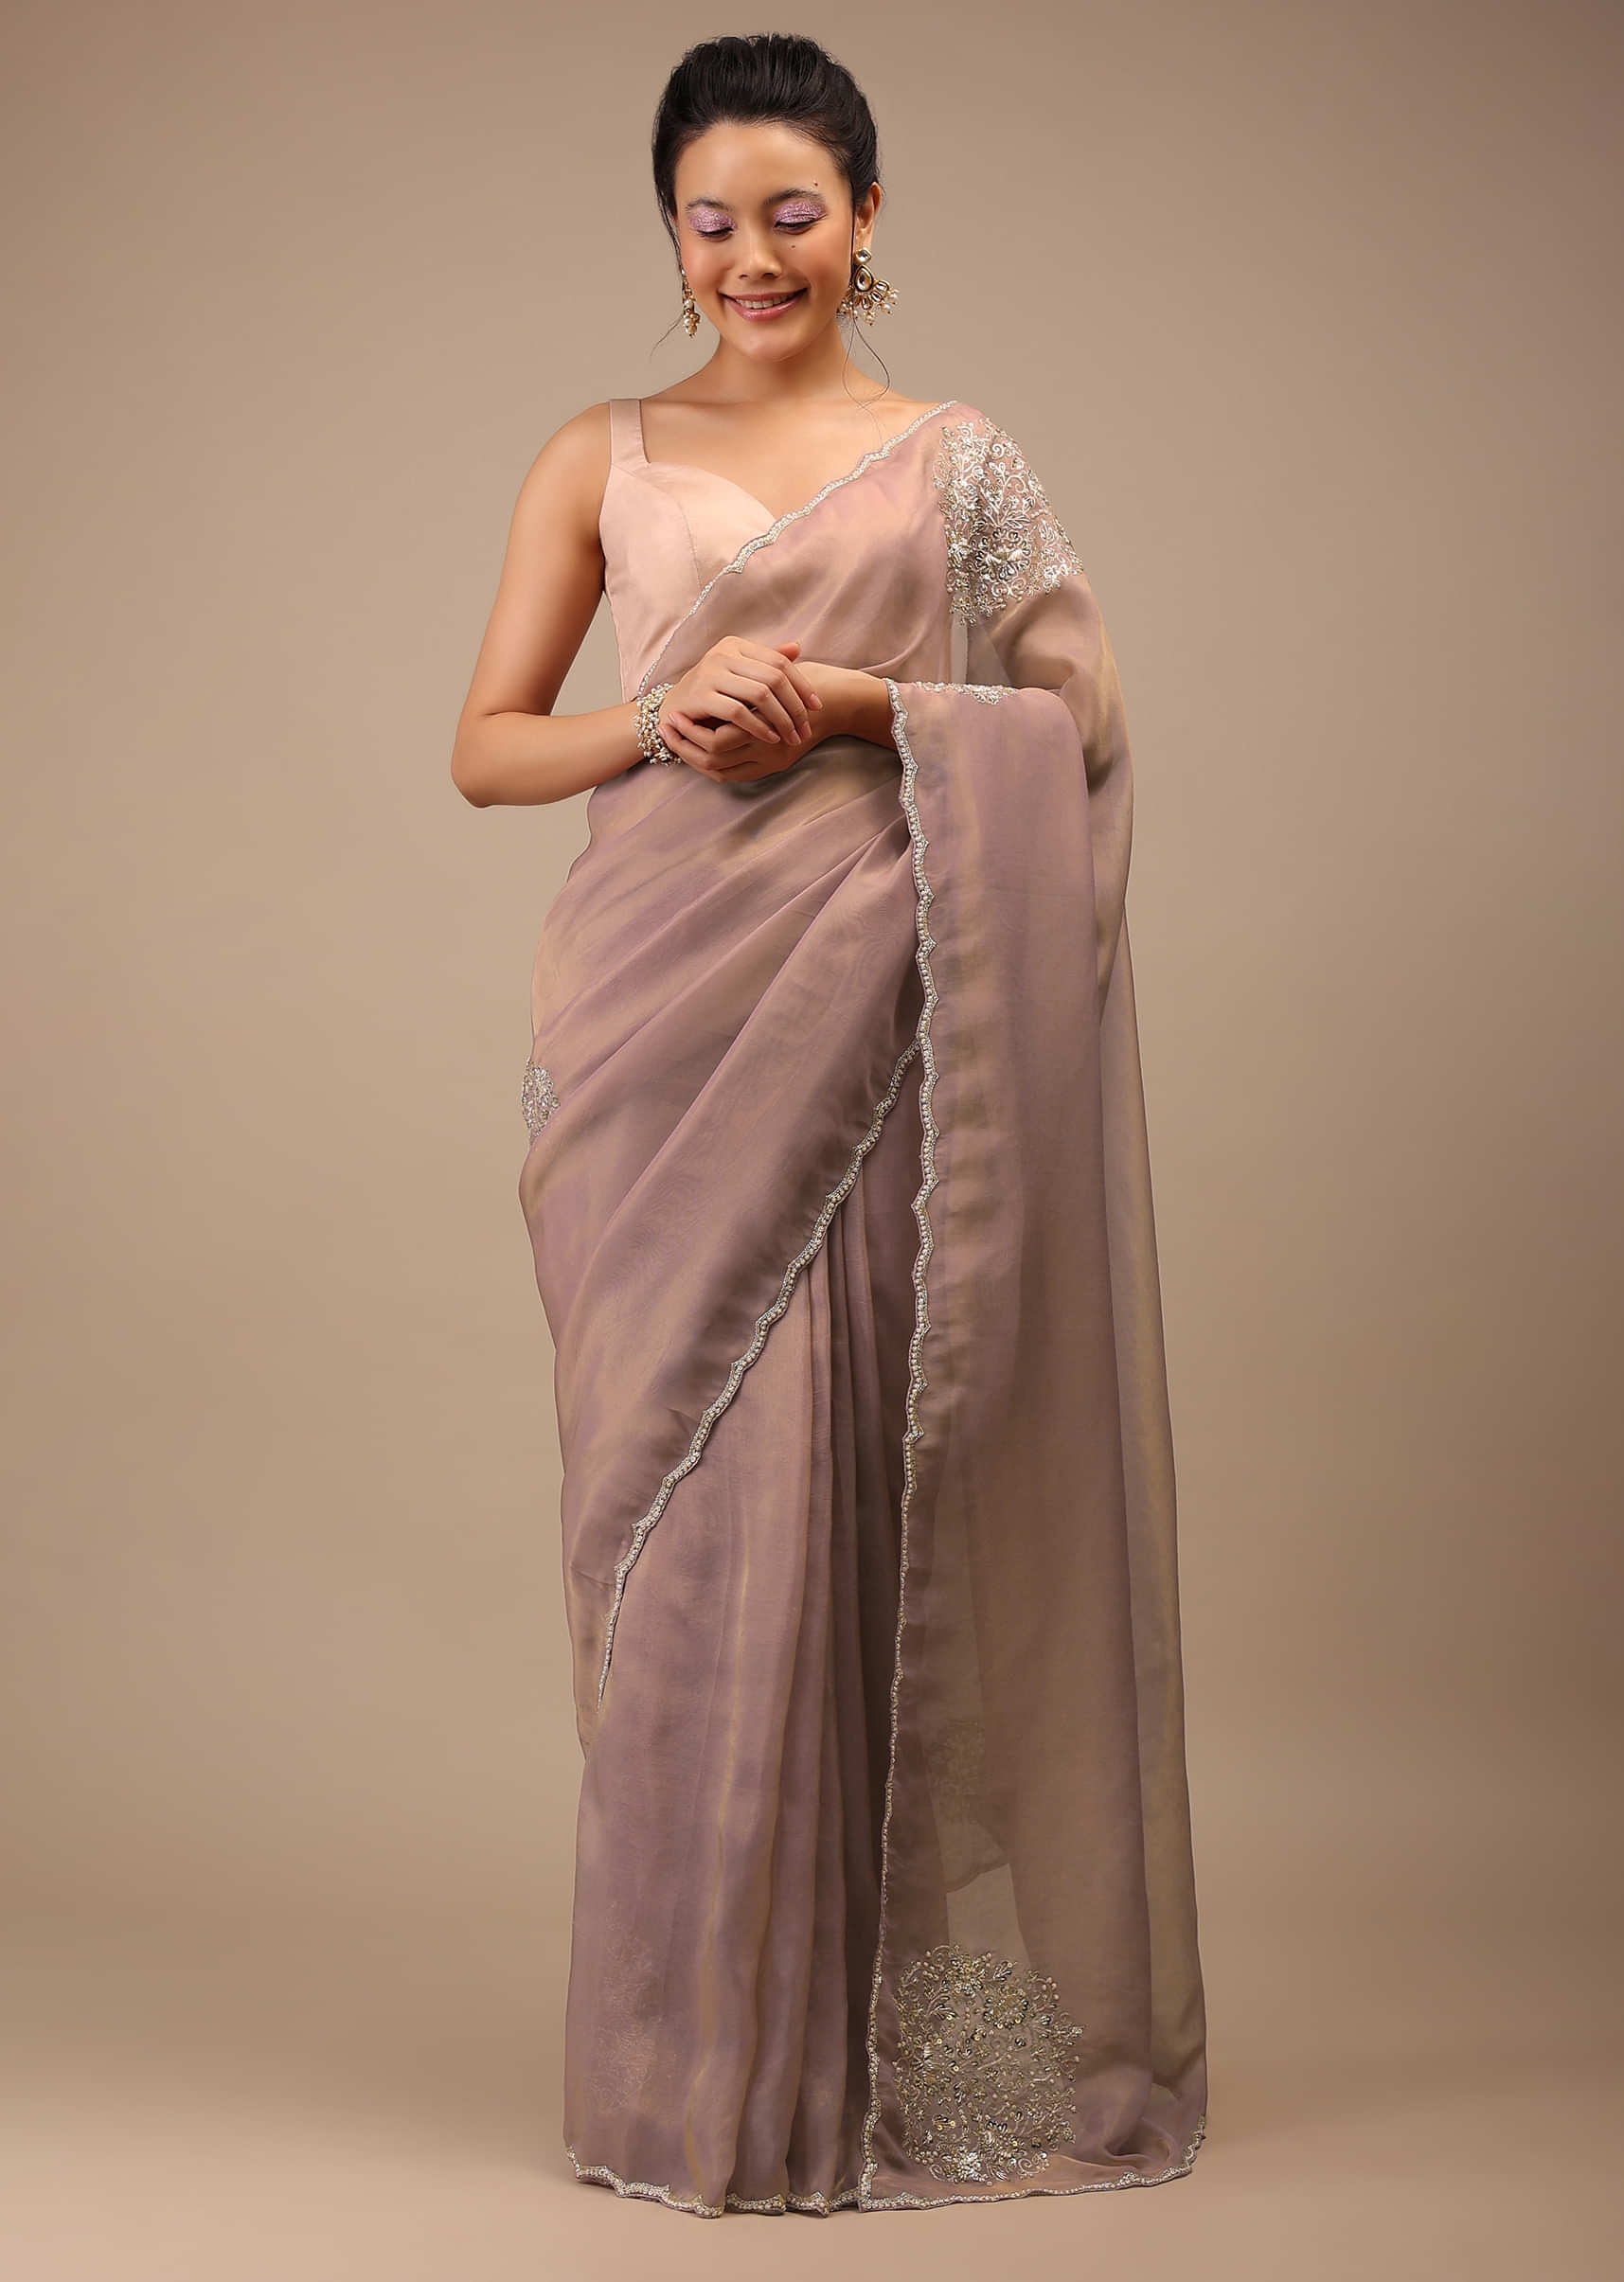 Orchid Haze Glass Tissue Saree With Zardozi Embroidery And Floral Buttis